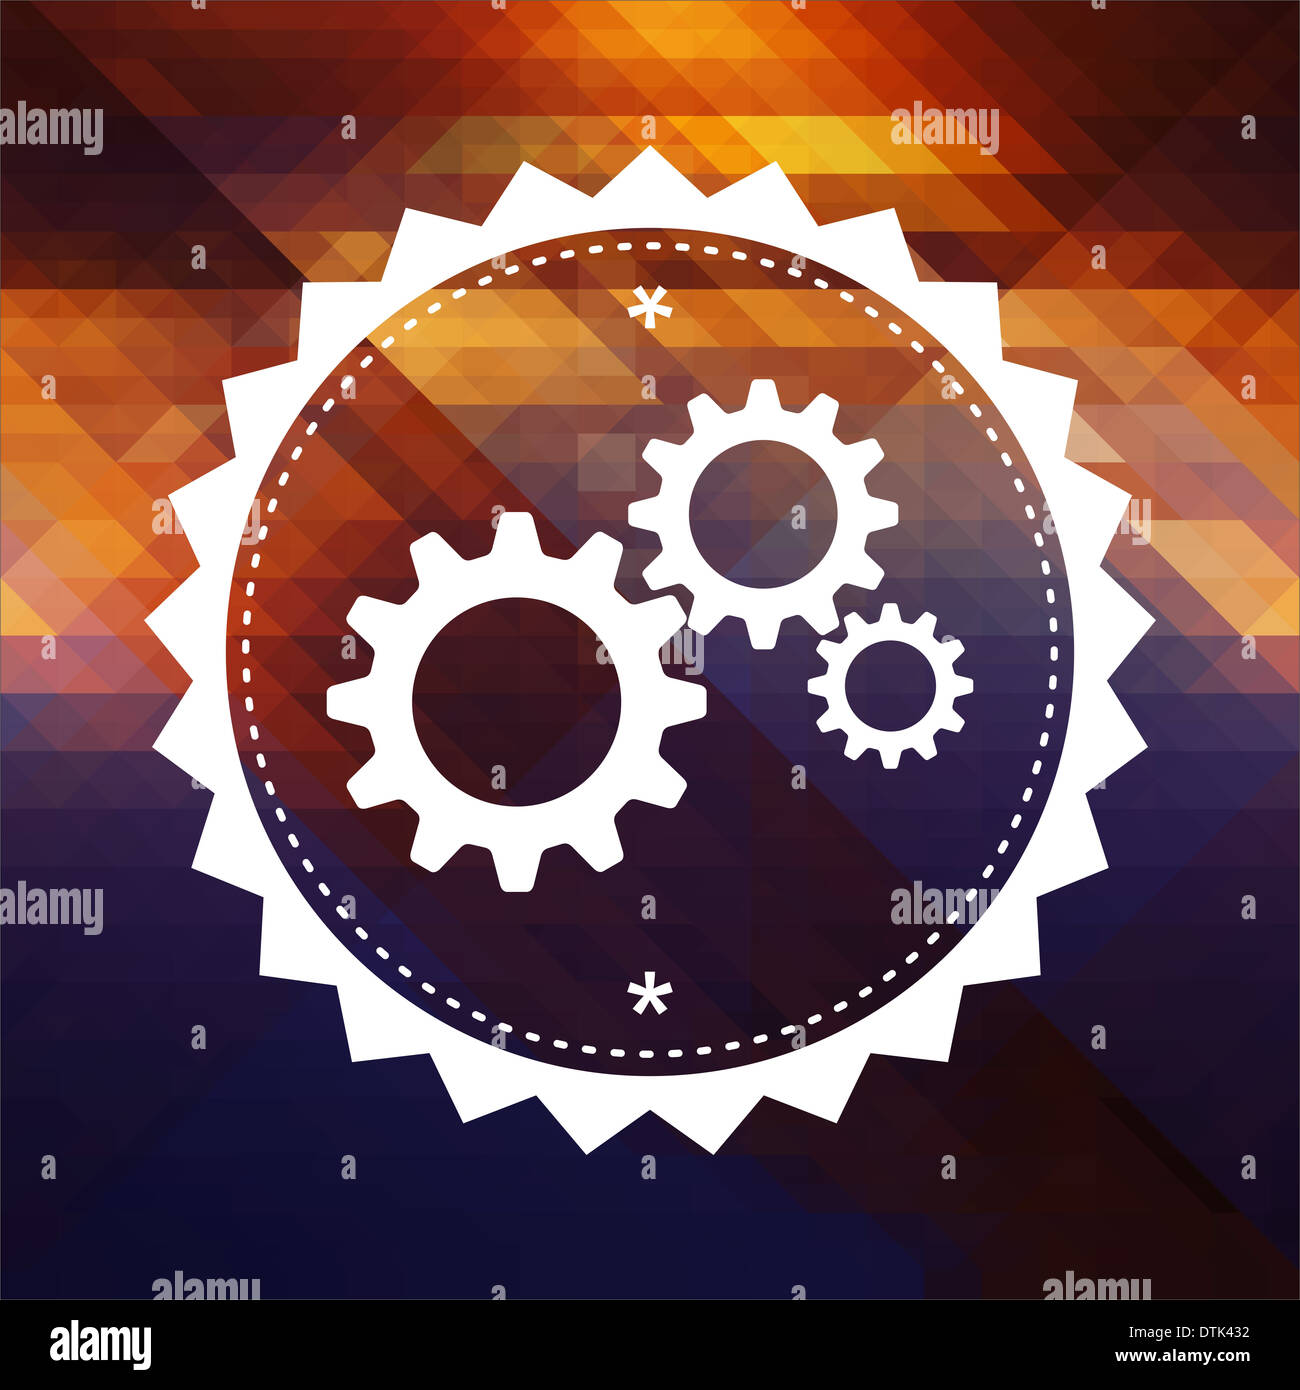 Cogwheel Gear Mechanism. Retro label design. Hipster background made of triangles, color flow effect. Stock Photo